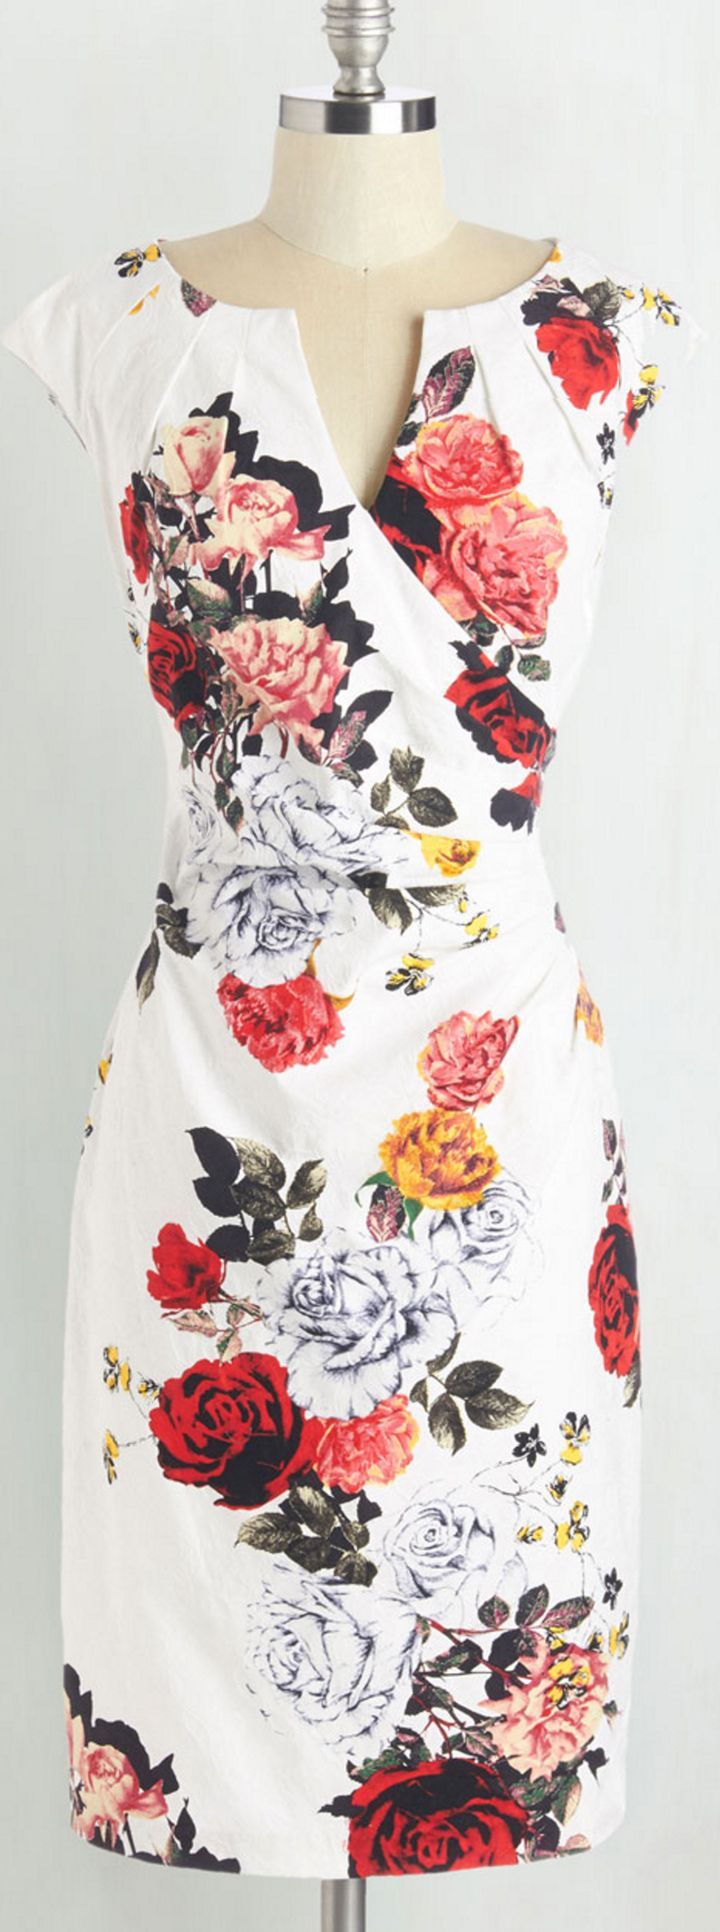 Such a beautiful floral dress for spring!